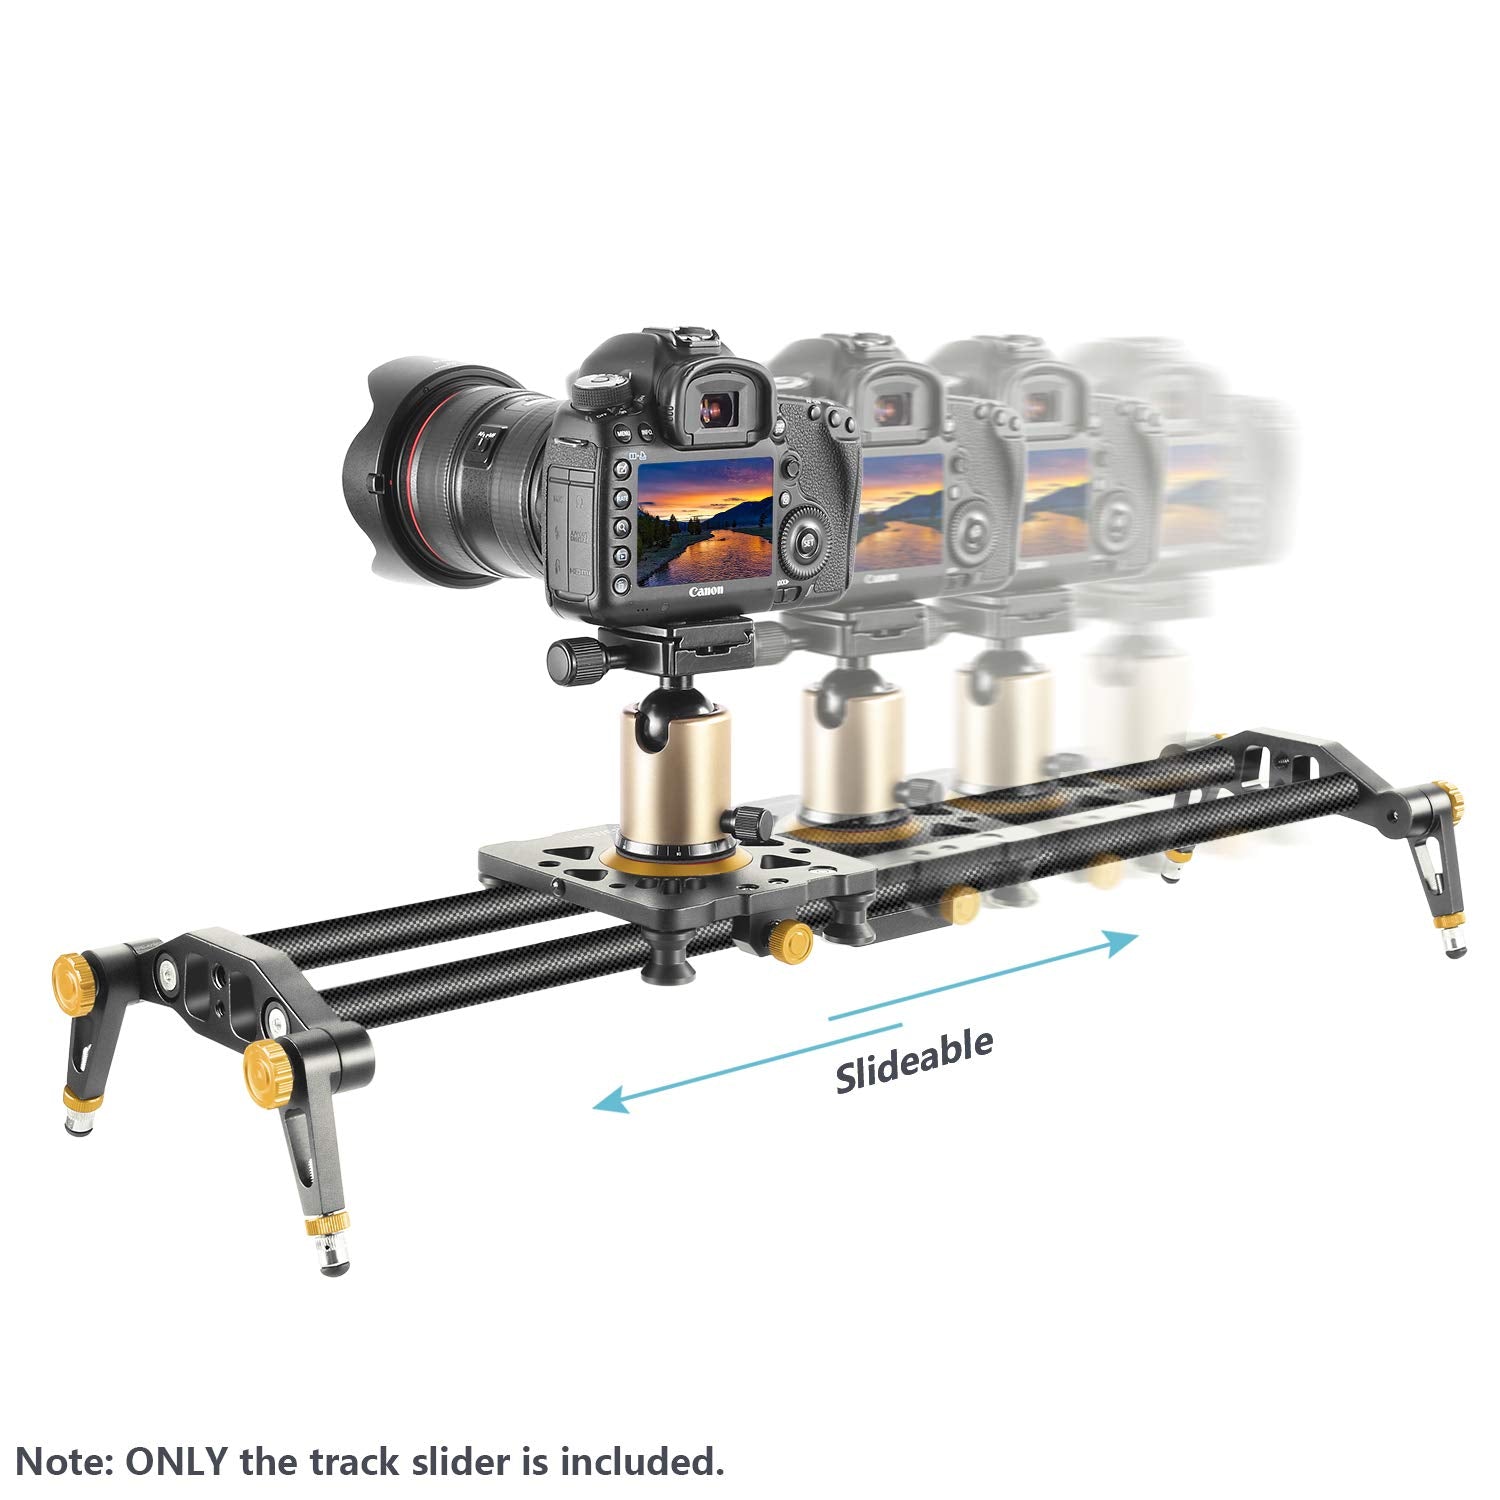 Neewer Carbon Fiber Camera Track Slider Video Stabilizer Rail with 6 Bearings for DSLR Camera DV Video Camcorder Film Photography - neewer.com